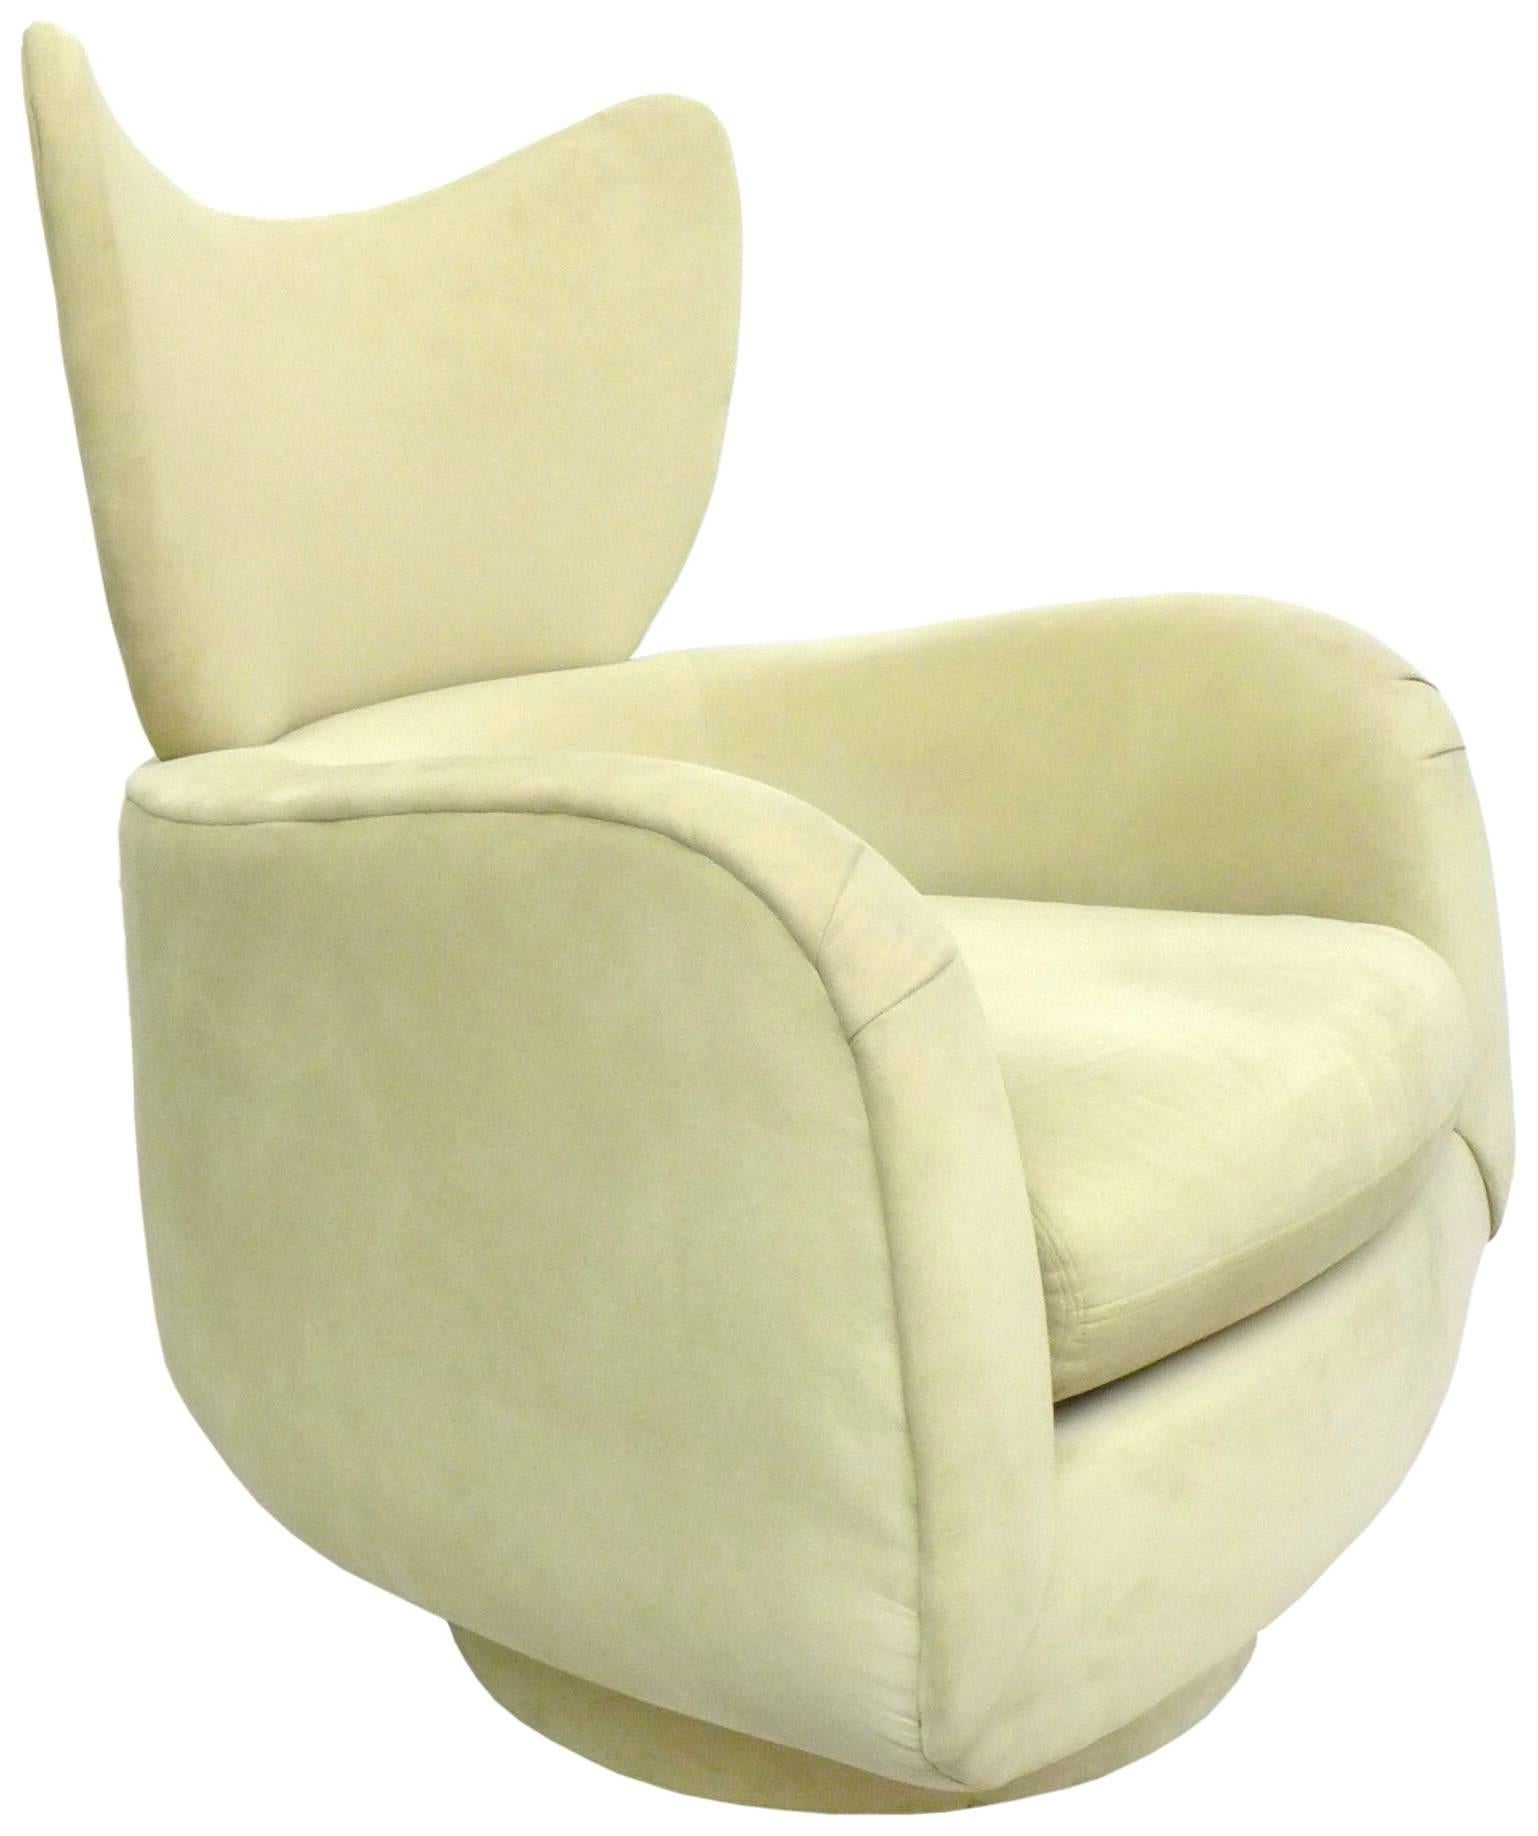 An incredibly stylish and comfortable swivel lounge chair designed by Vladimir Kagan for Directional. A great form with an unusual wing-back detail and its original pale-sage suede upholstery. A wonderfully sculptural and functional seating design